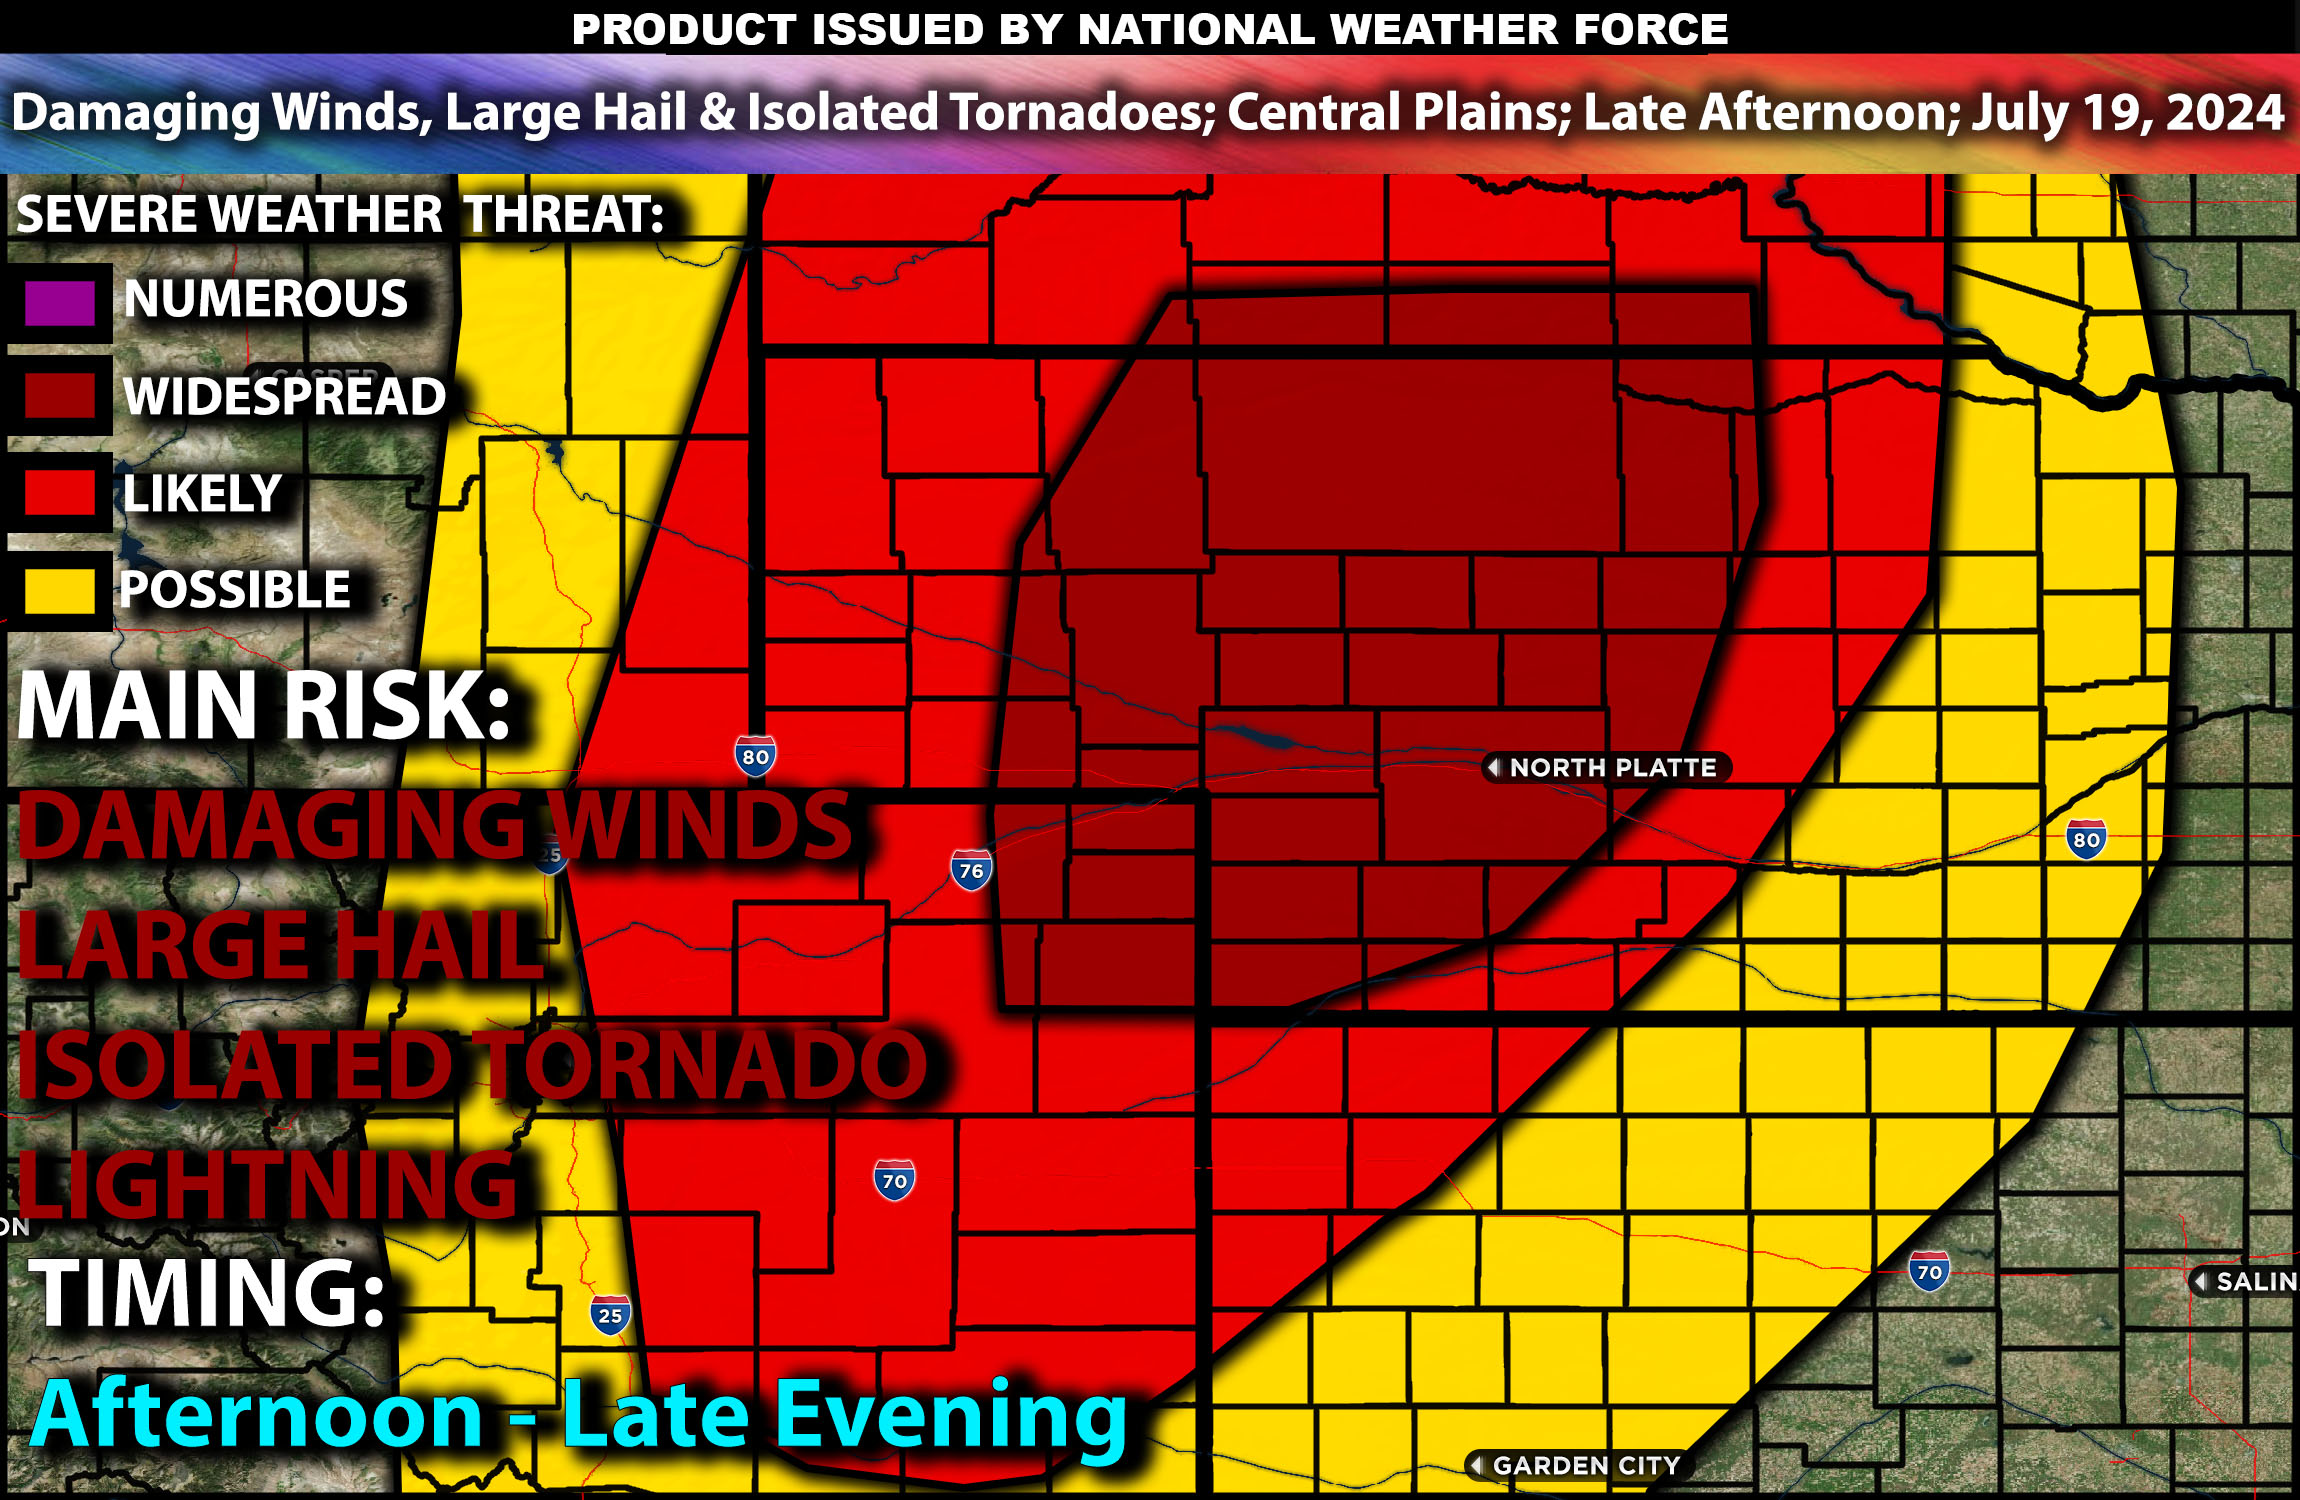 Damaging Winds, Large Hail & Isolated Tornadoes Likely; Central Plains; Late Afternoon; July 19, 2024